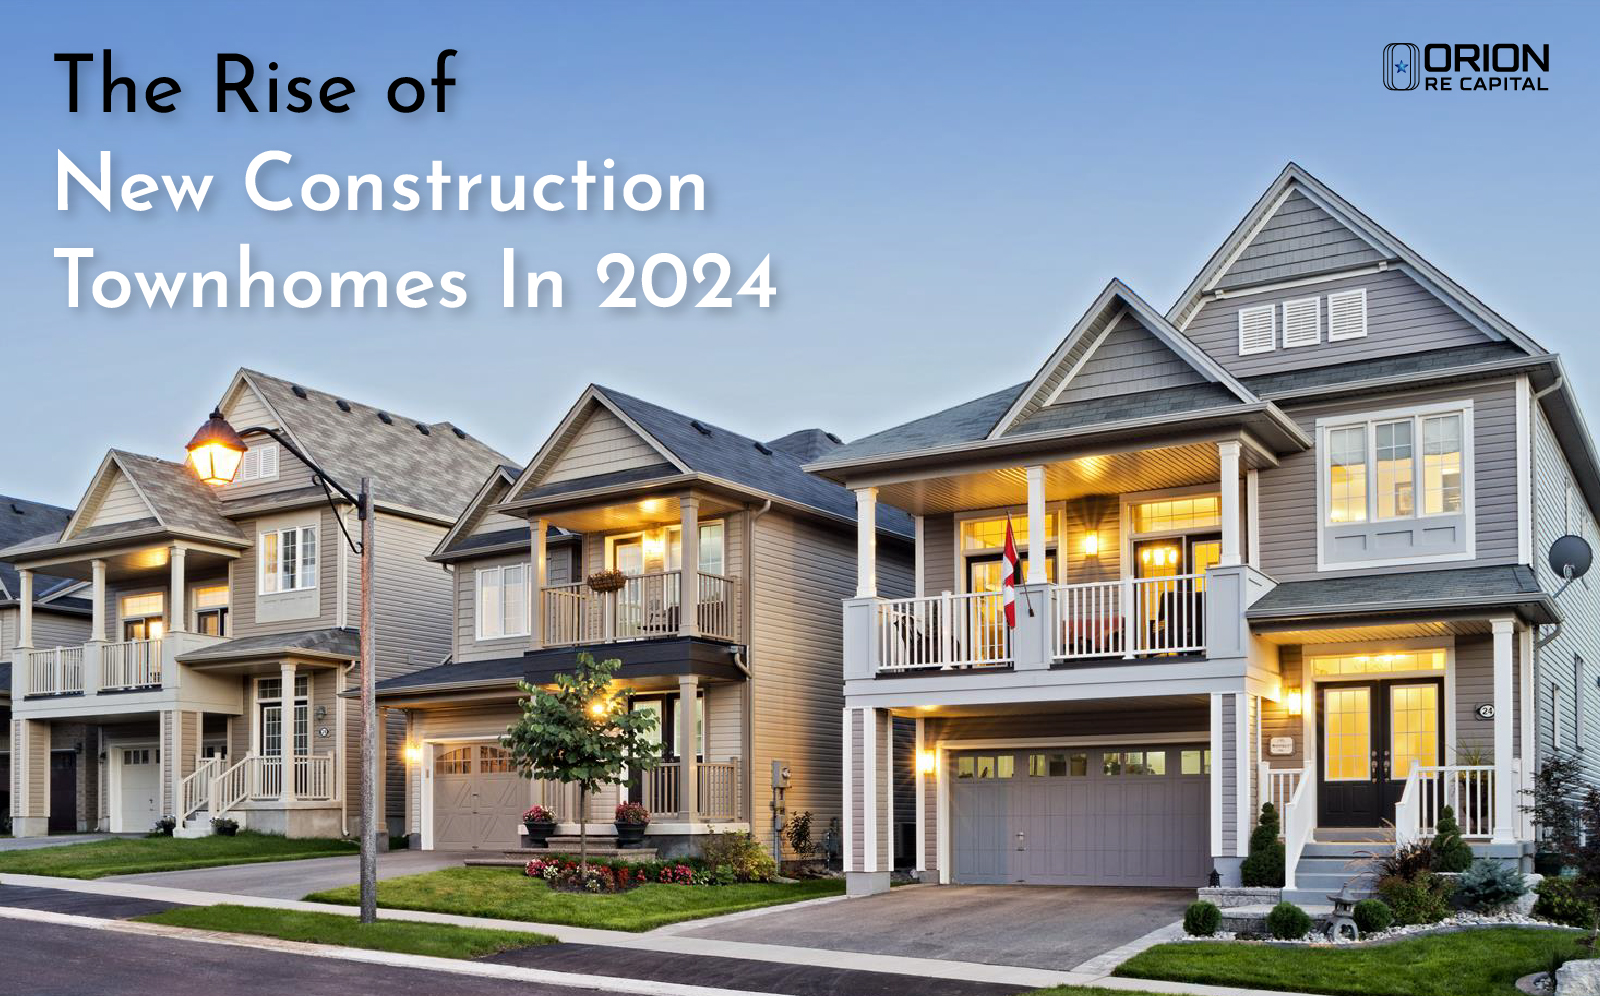 The Rise of New Construction Townhomes in 2024